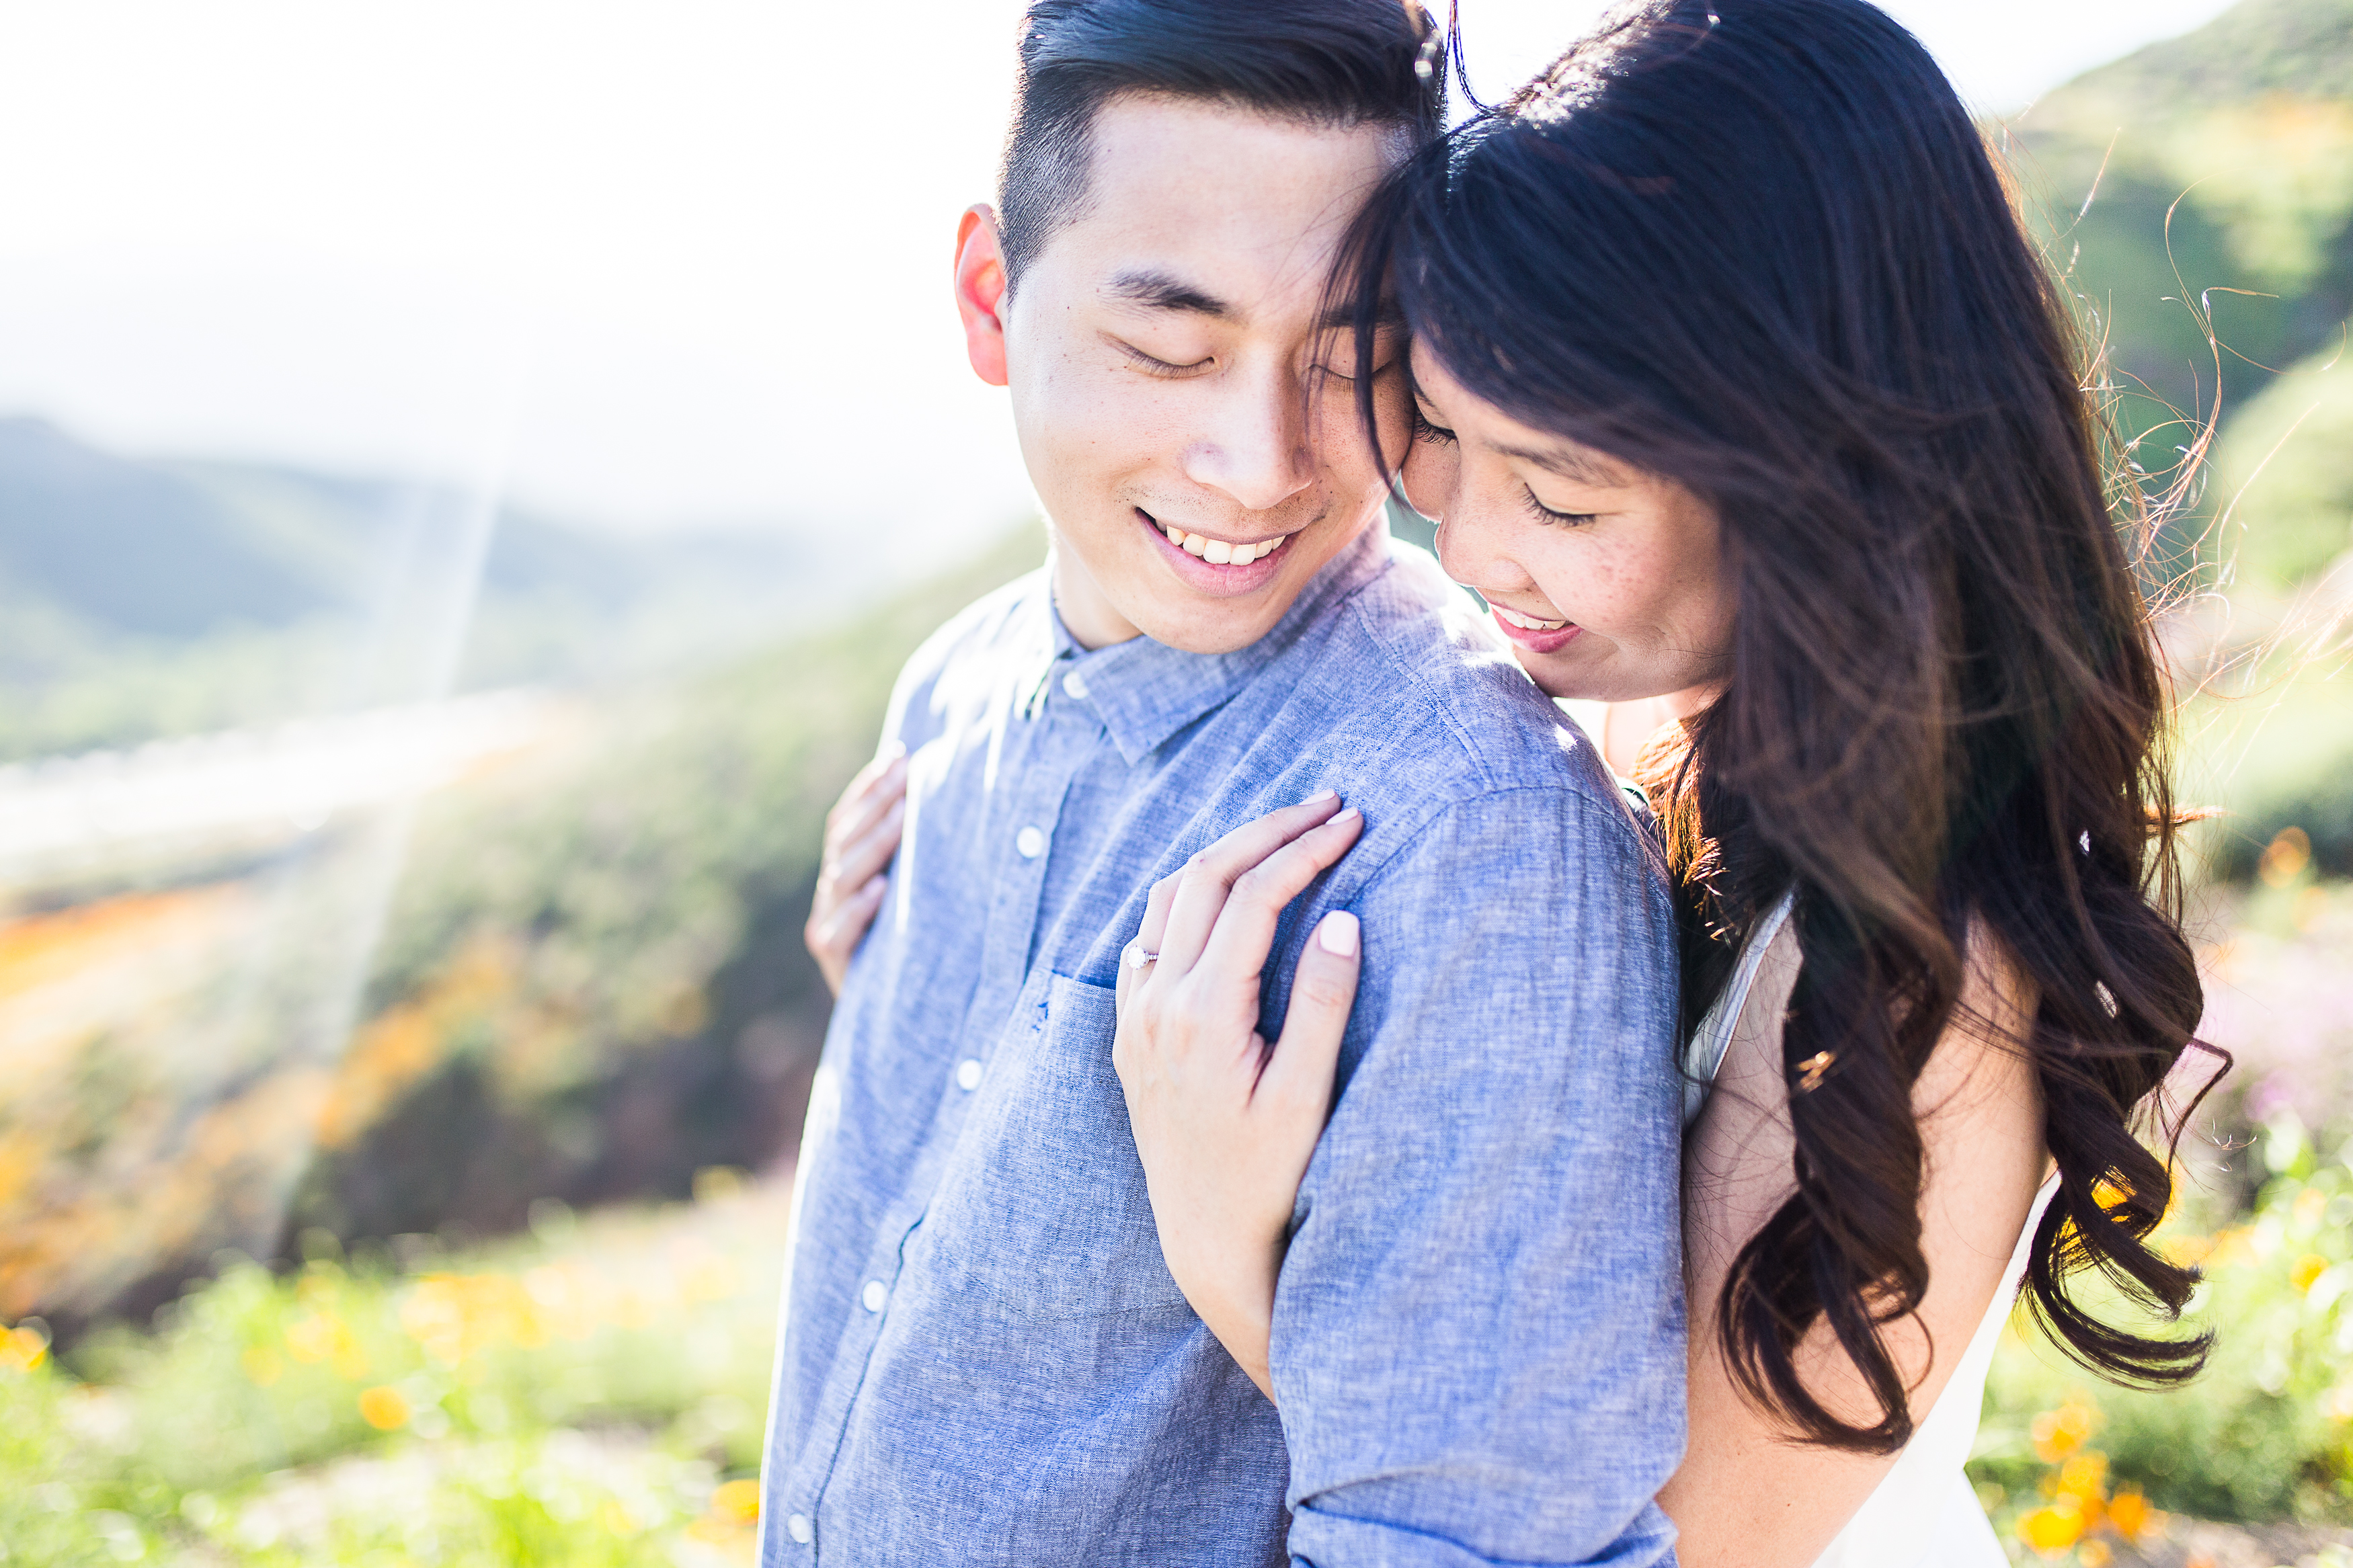 Arnold & Jessica’s Flower Field Engagement in Southern California